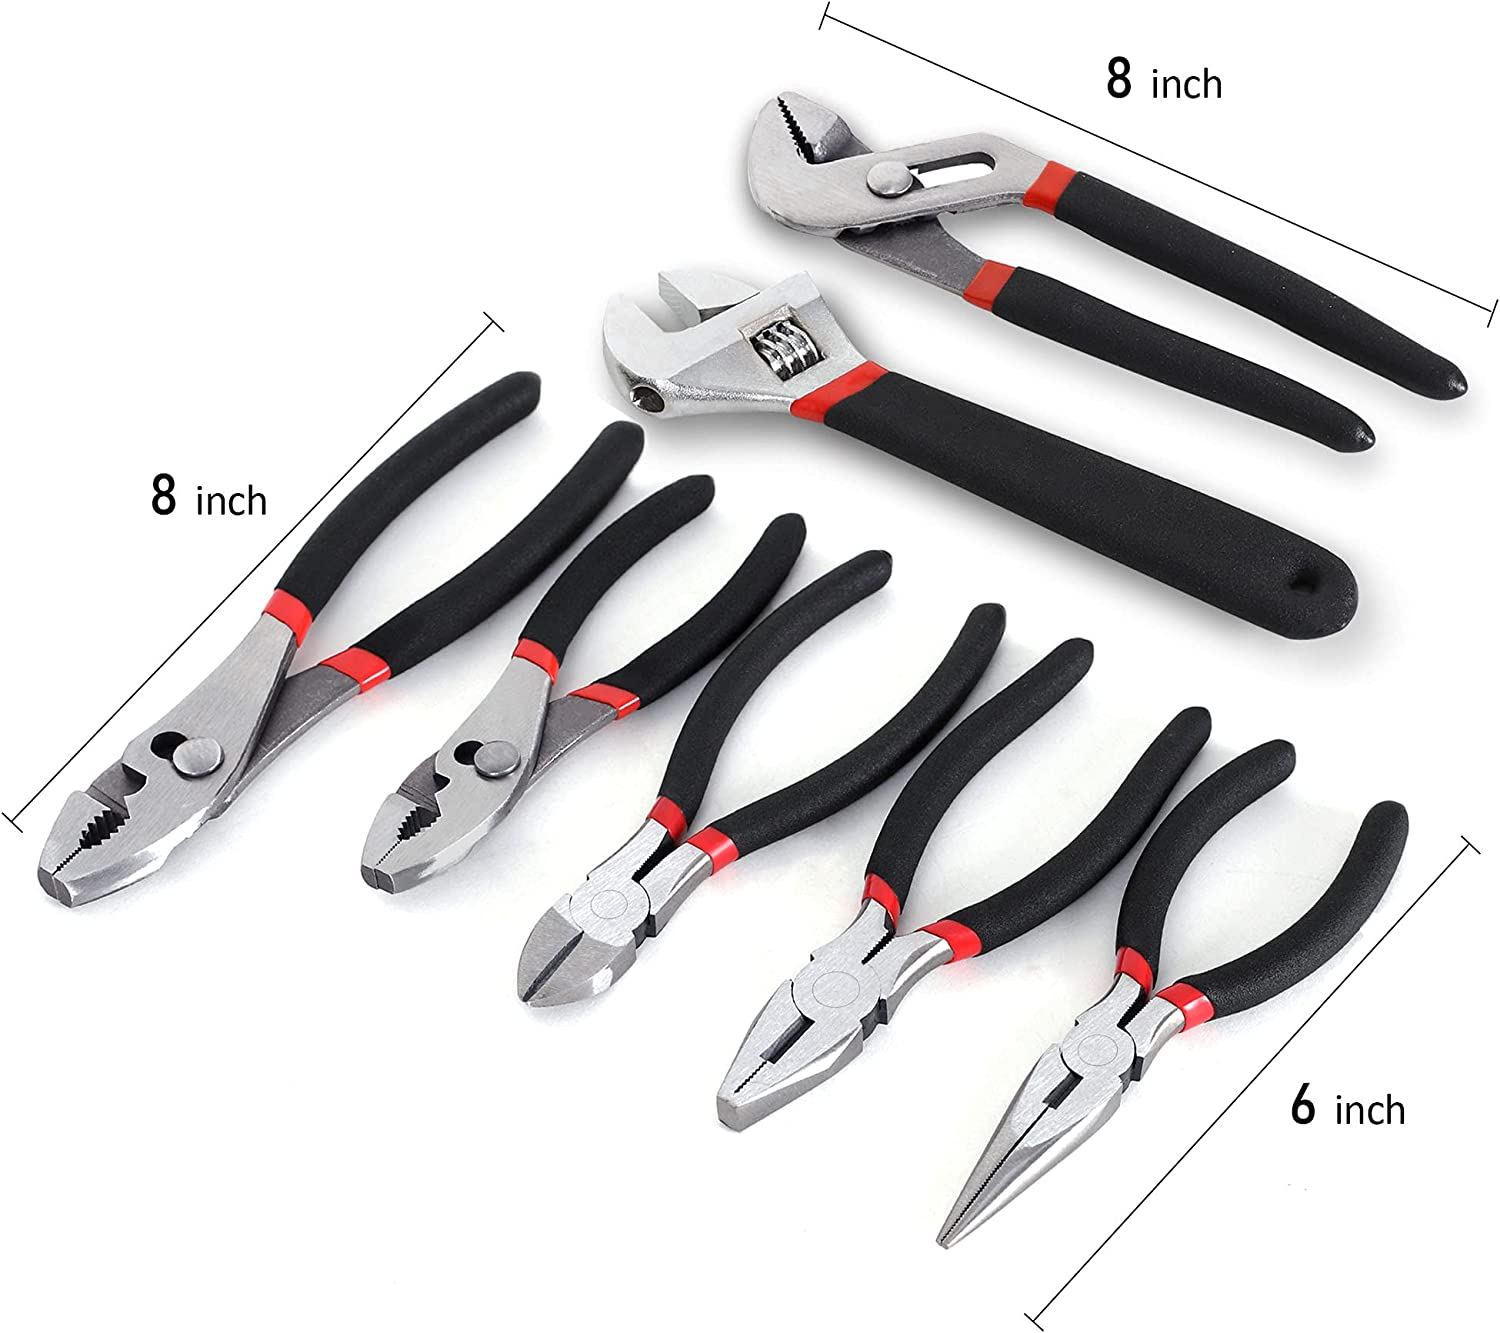 7-Piece Utility Pliers and Wrench Set, Includes Slip Joint Pliers, Long Nose Pliers, Diagonal Pliers, Groove Joint Pliers, Linesman Pliers and Adjustable Wrench, Dipped Handle